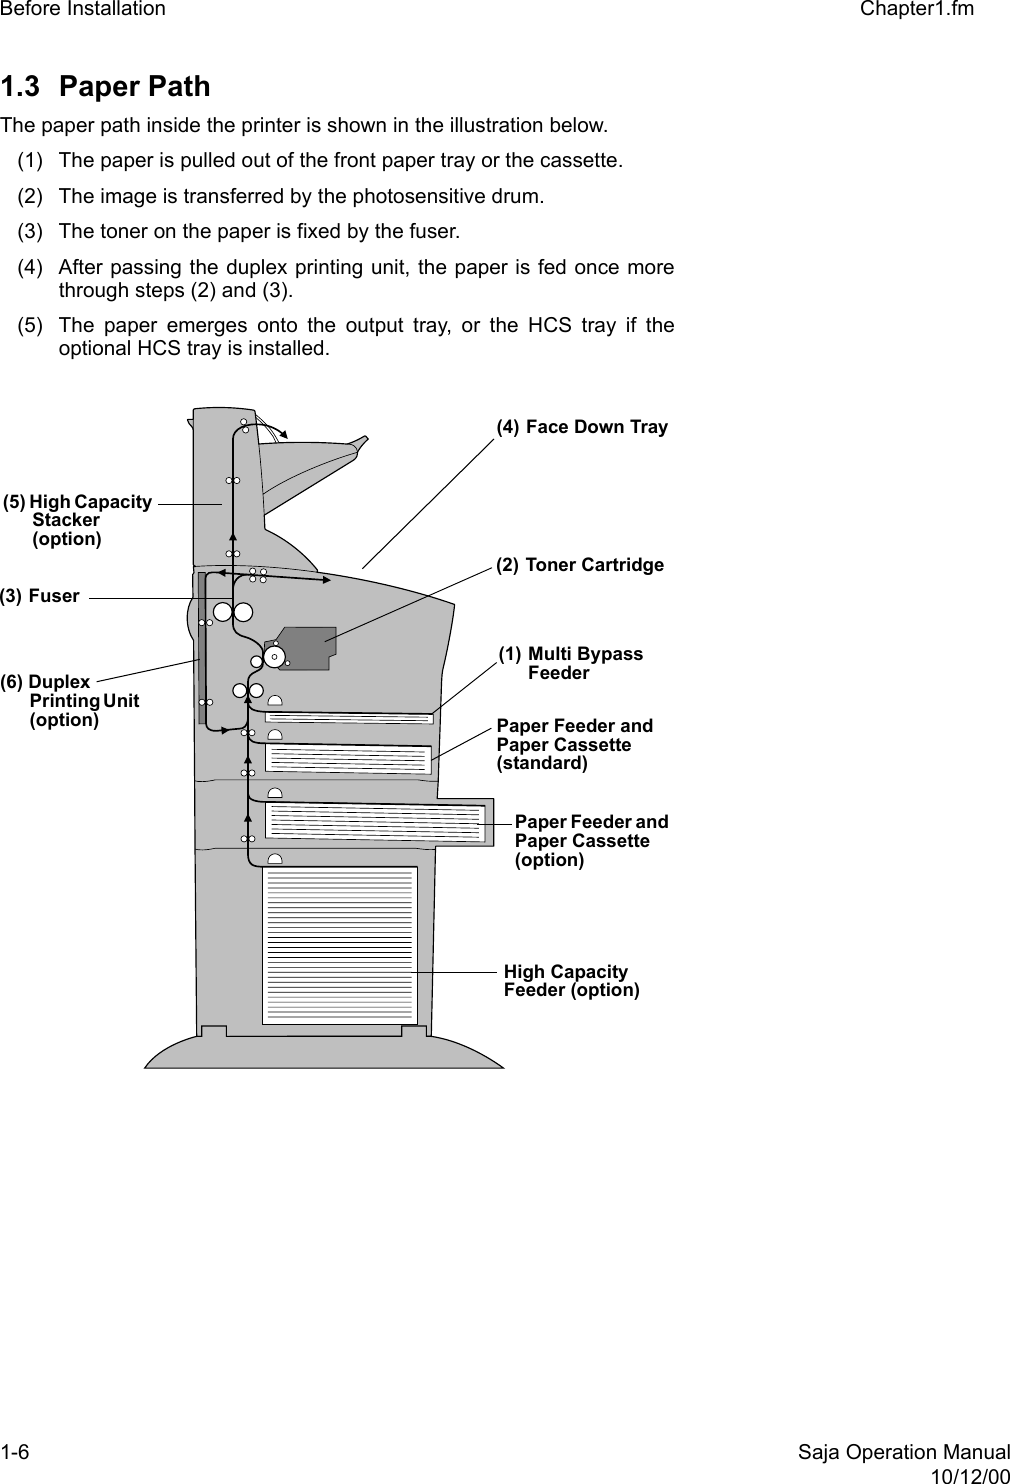 1-6 Saja Operation Manual10/12/00Before Installation Chapter1.fm1.3 Paper Path The paper path inside the printer is shown in the illustration below. (1) The paper is pulled out of the front paper tray or the cassette. (2) The image is transferred by the photosensitive drum. (3) The toner on the paper is fixed by the fuser. (4) After passing the duplex printing unit, the paper is fed once morethrough steps (2) and (3). (5) The paper emerges onto the output tray, or the HCS tray if theoptional HCS tray is installed. (5) High Capacity Stacker (option)(3) Fuser(6) Duplex Printing Unit (option)(4) Face Down Tray(2) Toner Cartridge(1) Multi Bypass FeederPaper Feeder and Paper Cassette(standard)Paper Feeder and Paper Cassette (option)High Capacity Feeder (option)